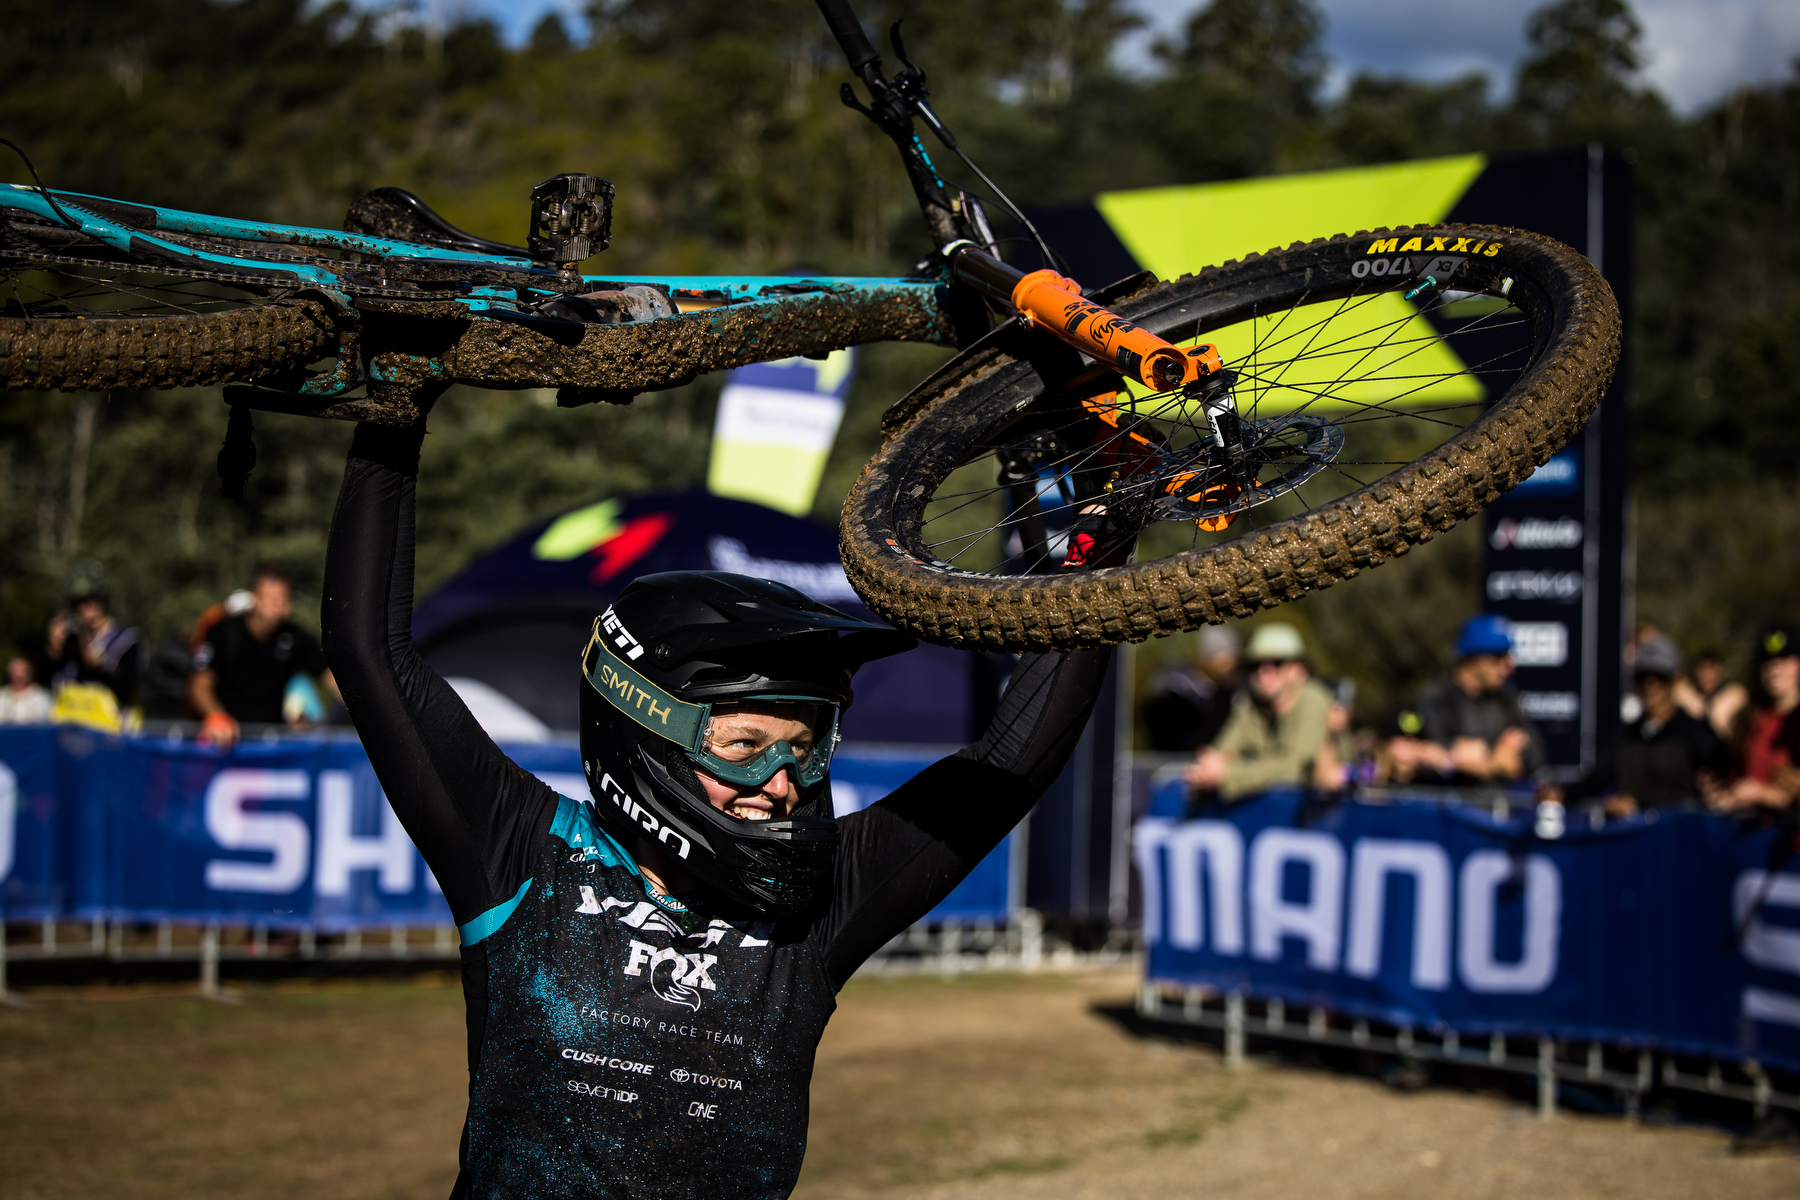 Yeti rider lifting their bike above their head in victory